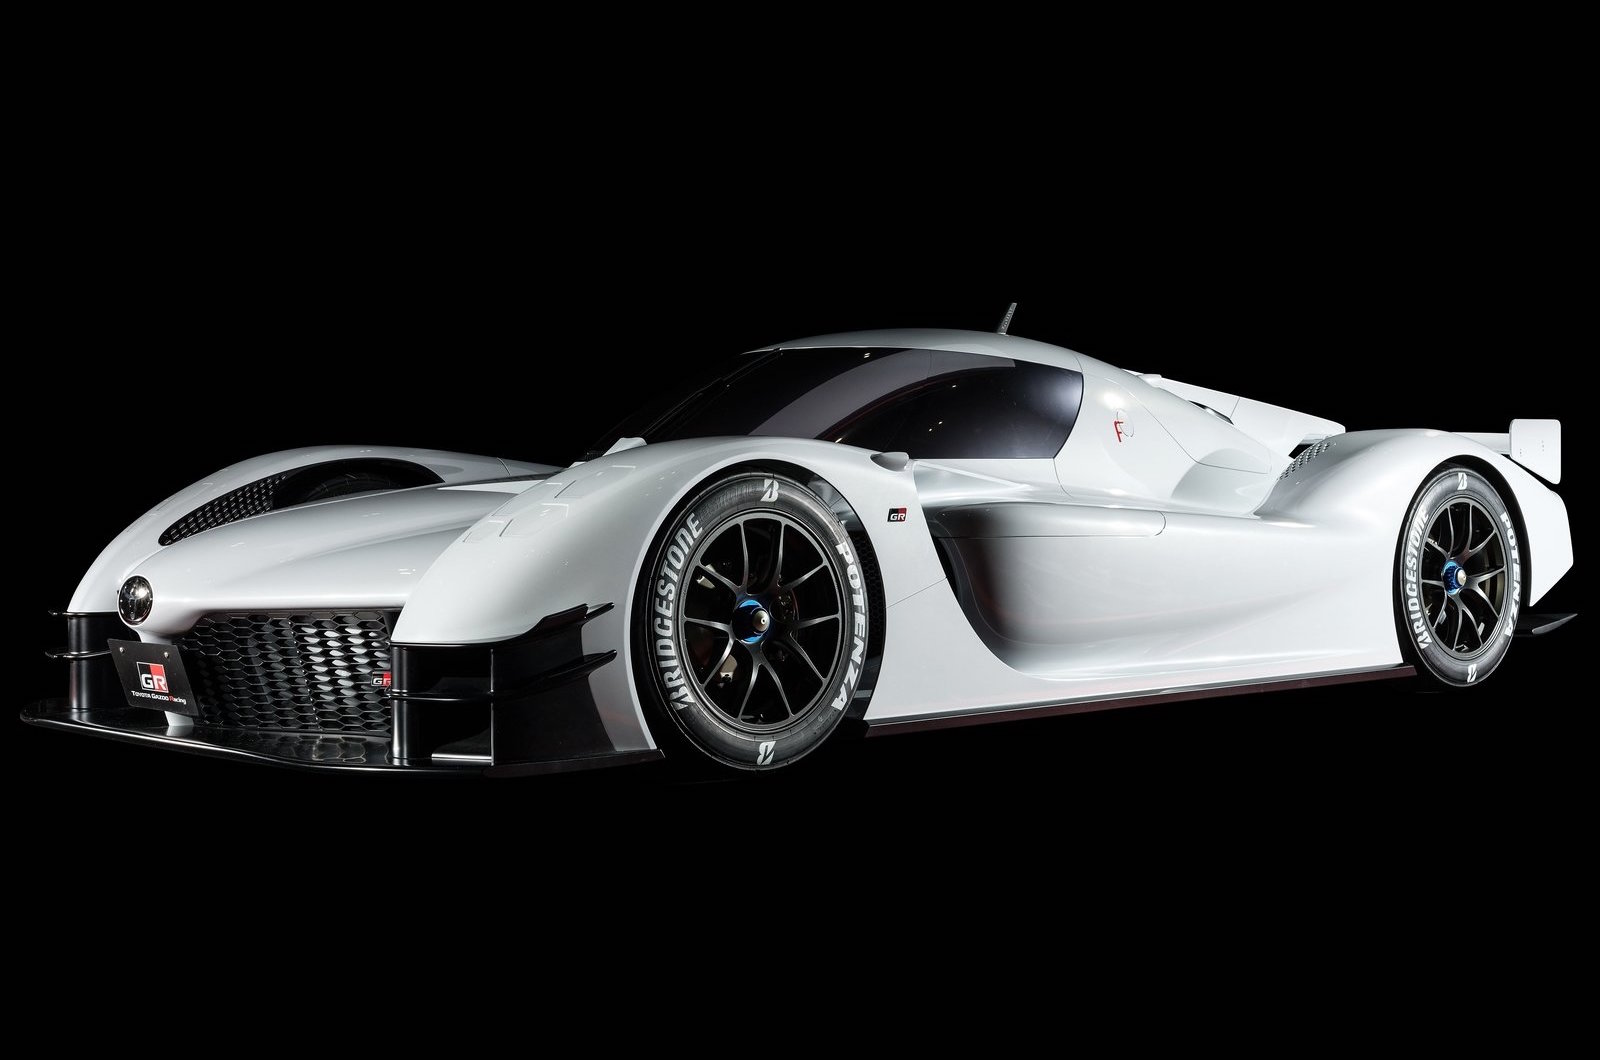 Toyota supercar confirmed, inspired by GR Super Sport concept